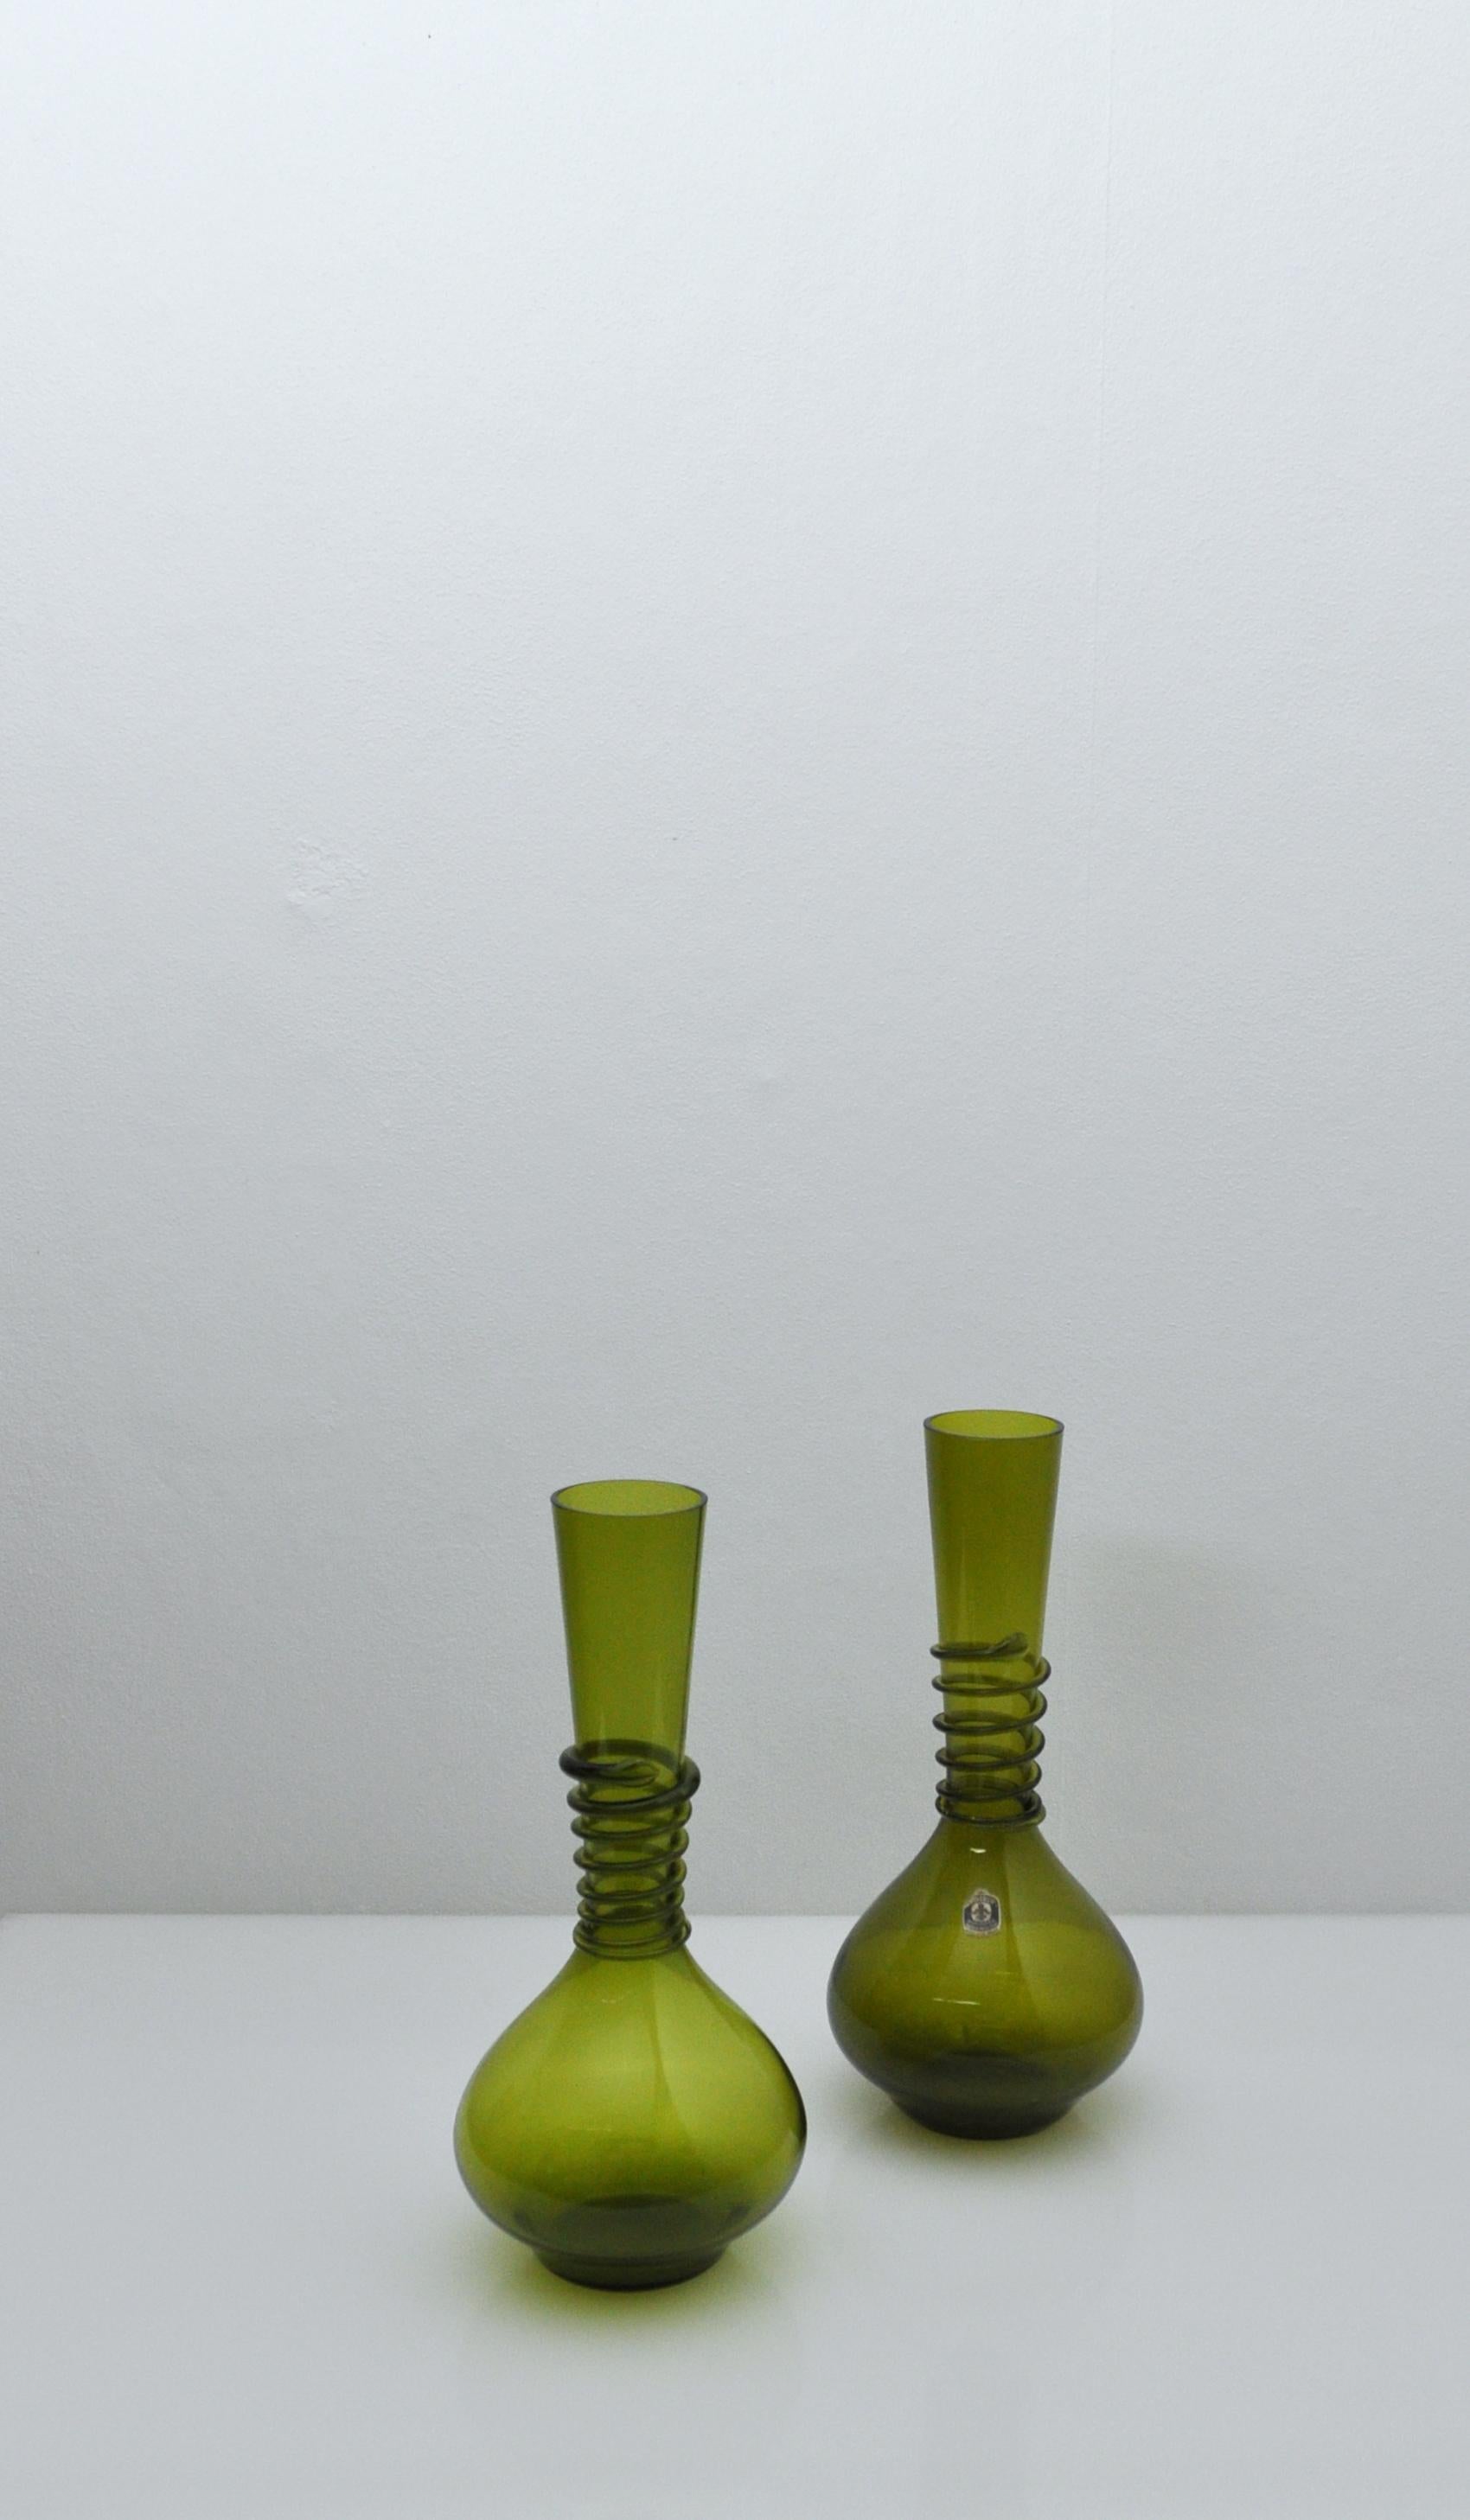 Art Glass antique green decanter or vase, conical neck with attached glass wire from the series 